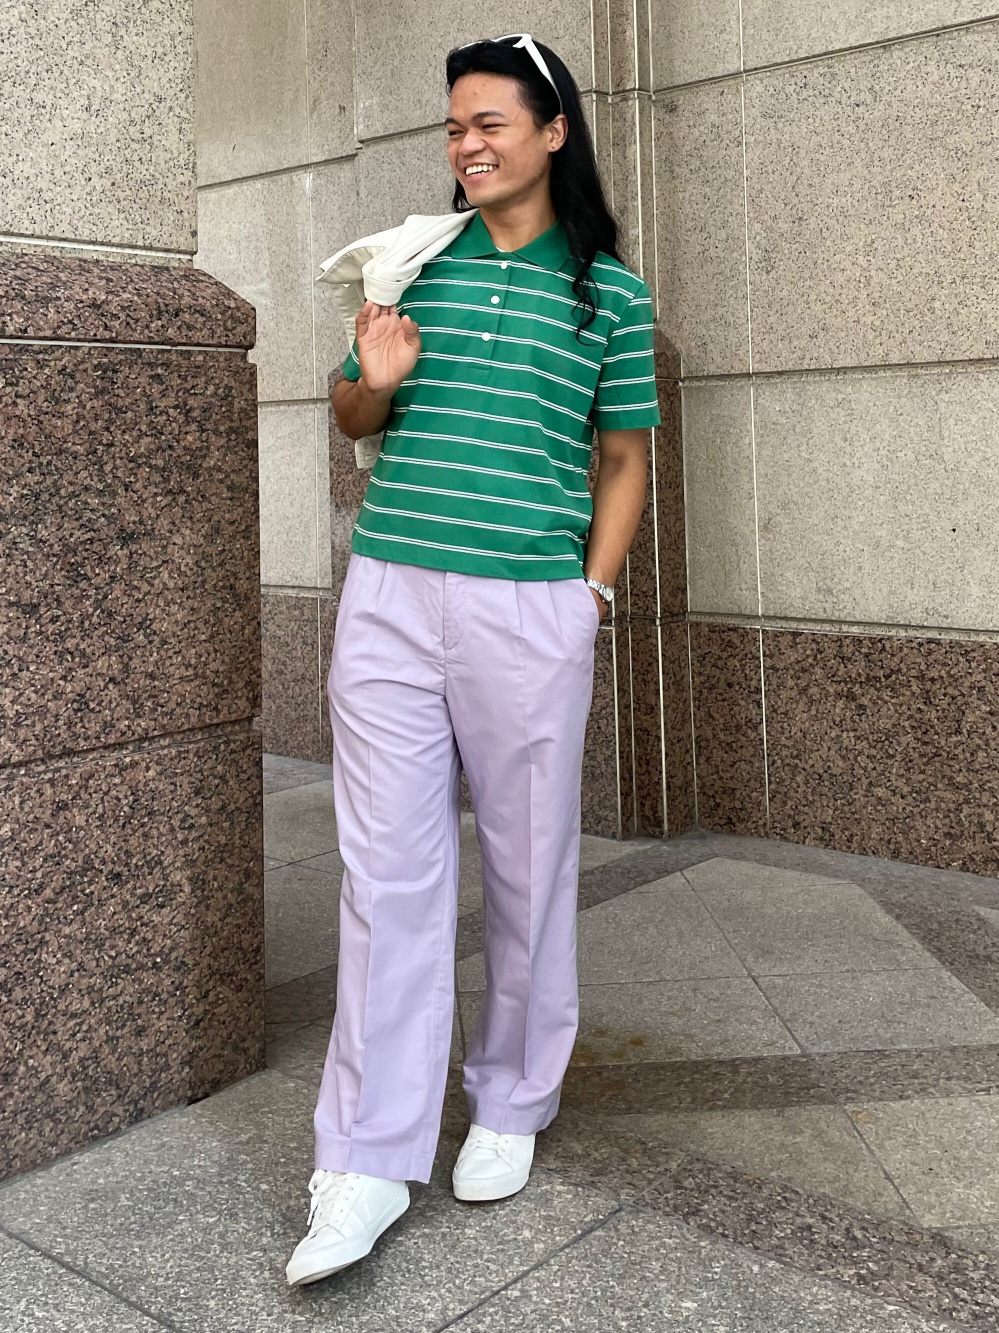 Check styling ideas for「LINEN BLEND PLEATED WIDE PANTS」